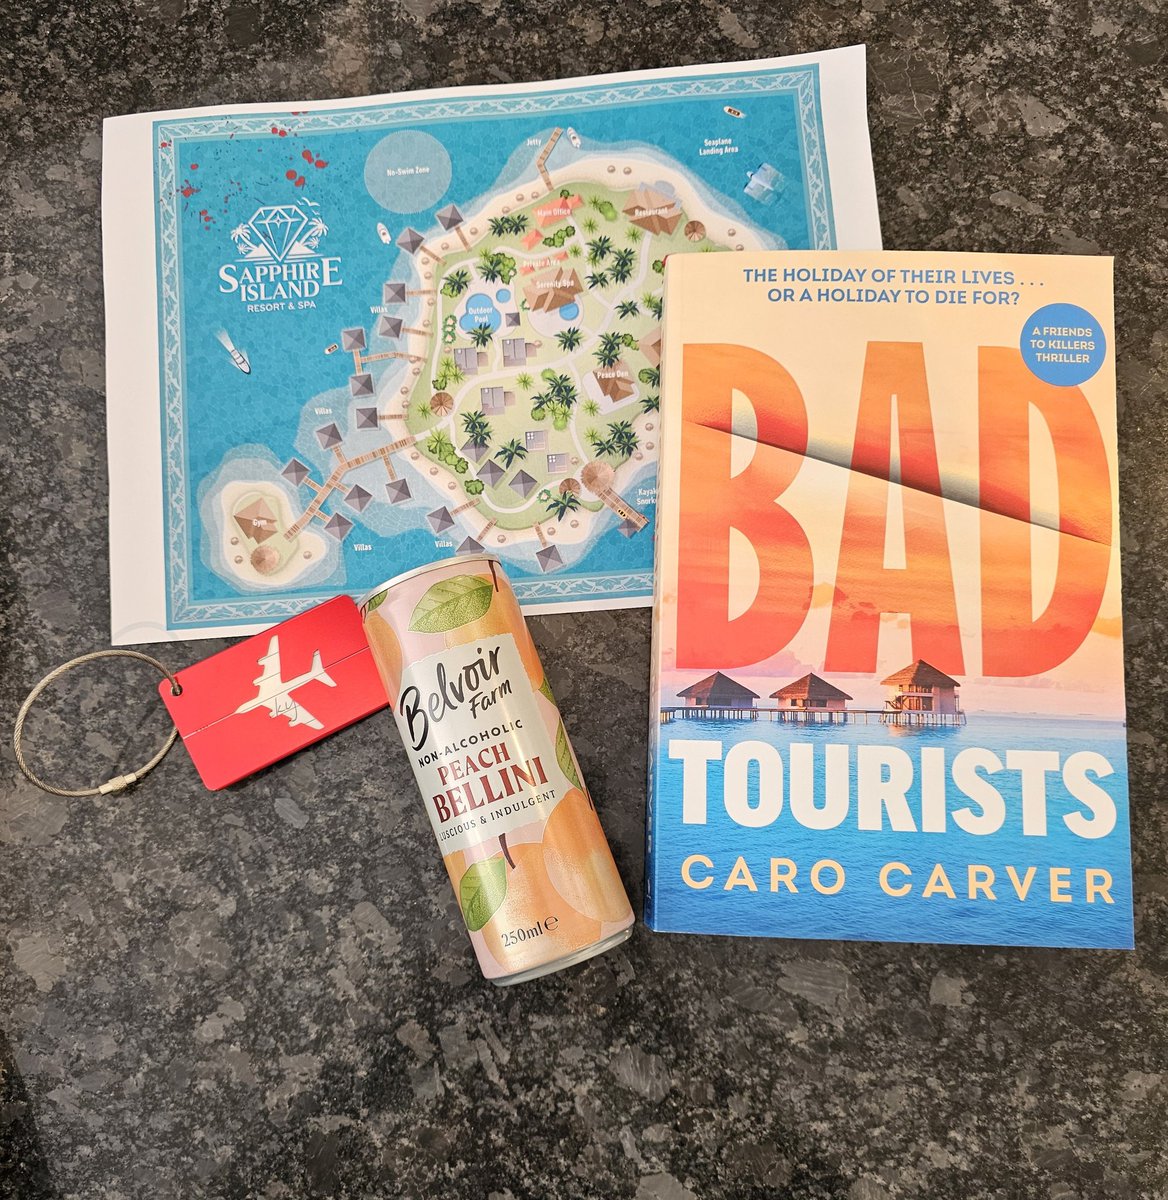 Thank you so much @alisonbarrow and @TransworldBooks for this amazing package. I can't wait to read #BadTourists @carverofbooks Published 4th July #books #bookbloggers #bookX